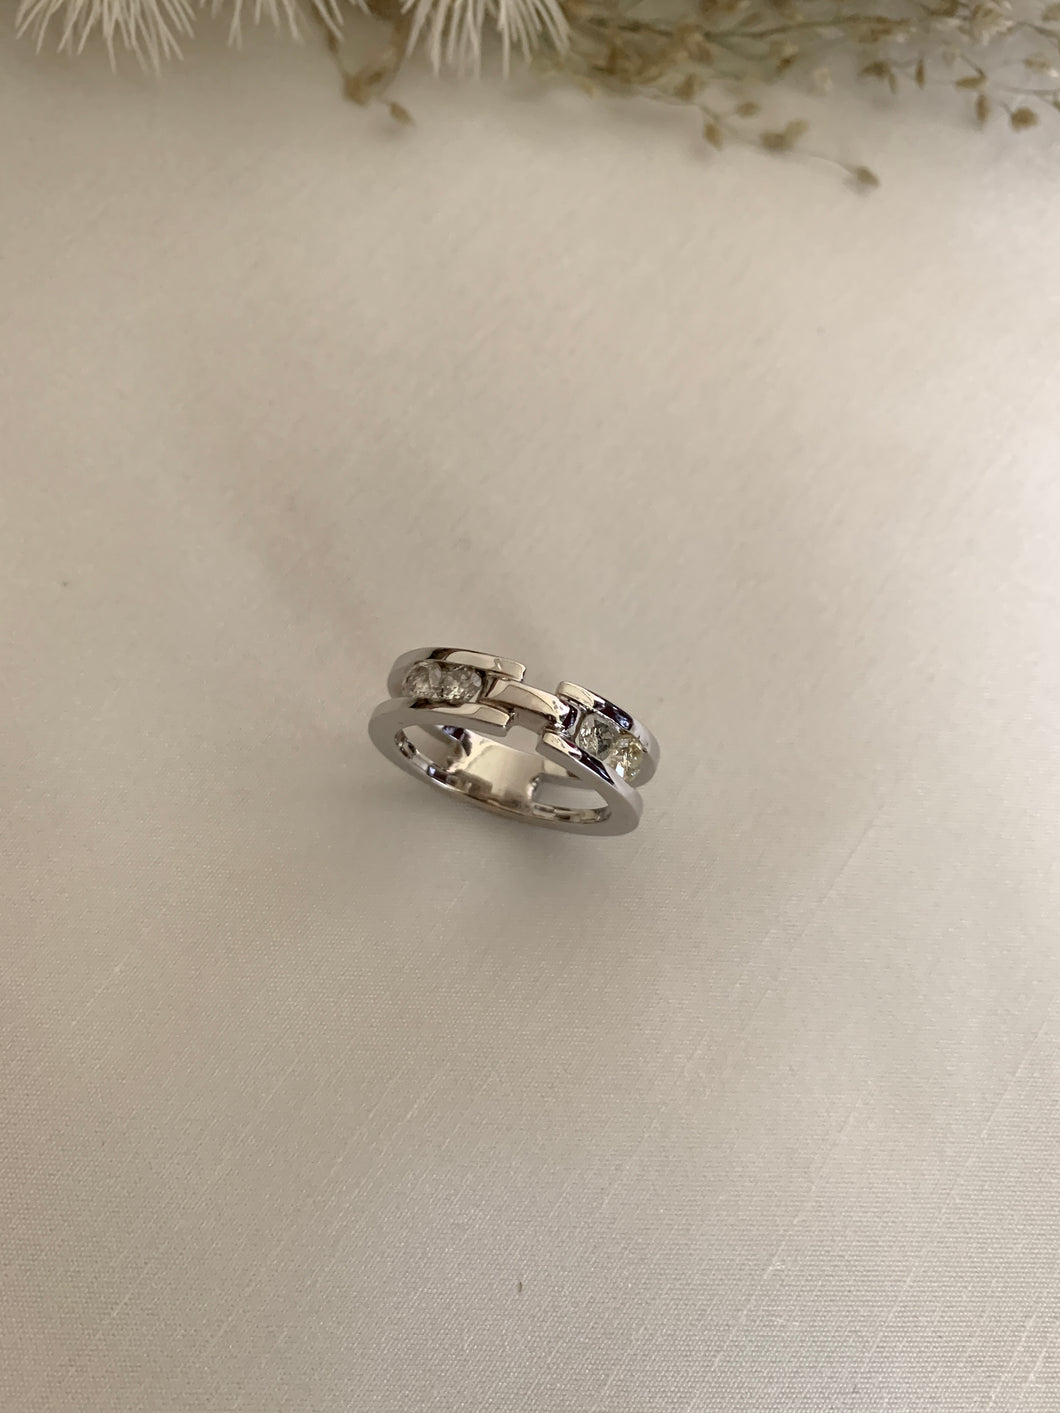 4 small round diamonds with a space in between the ring. In white gold setting. 